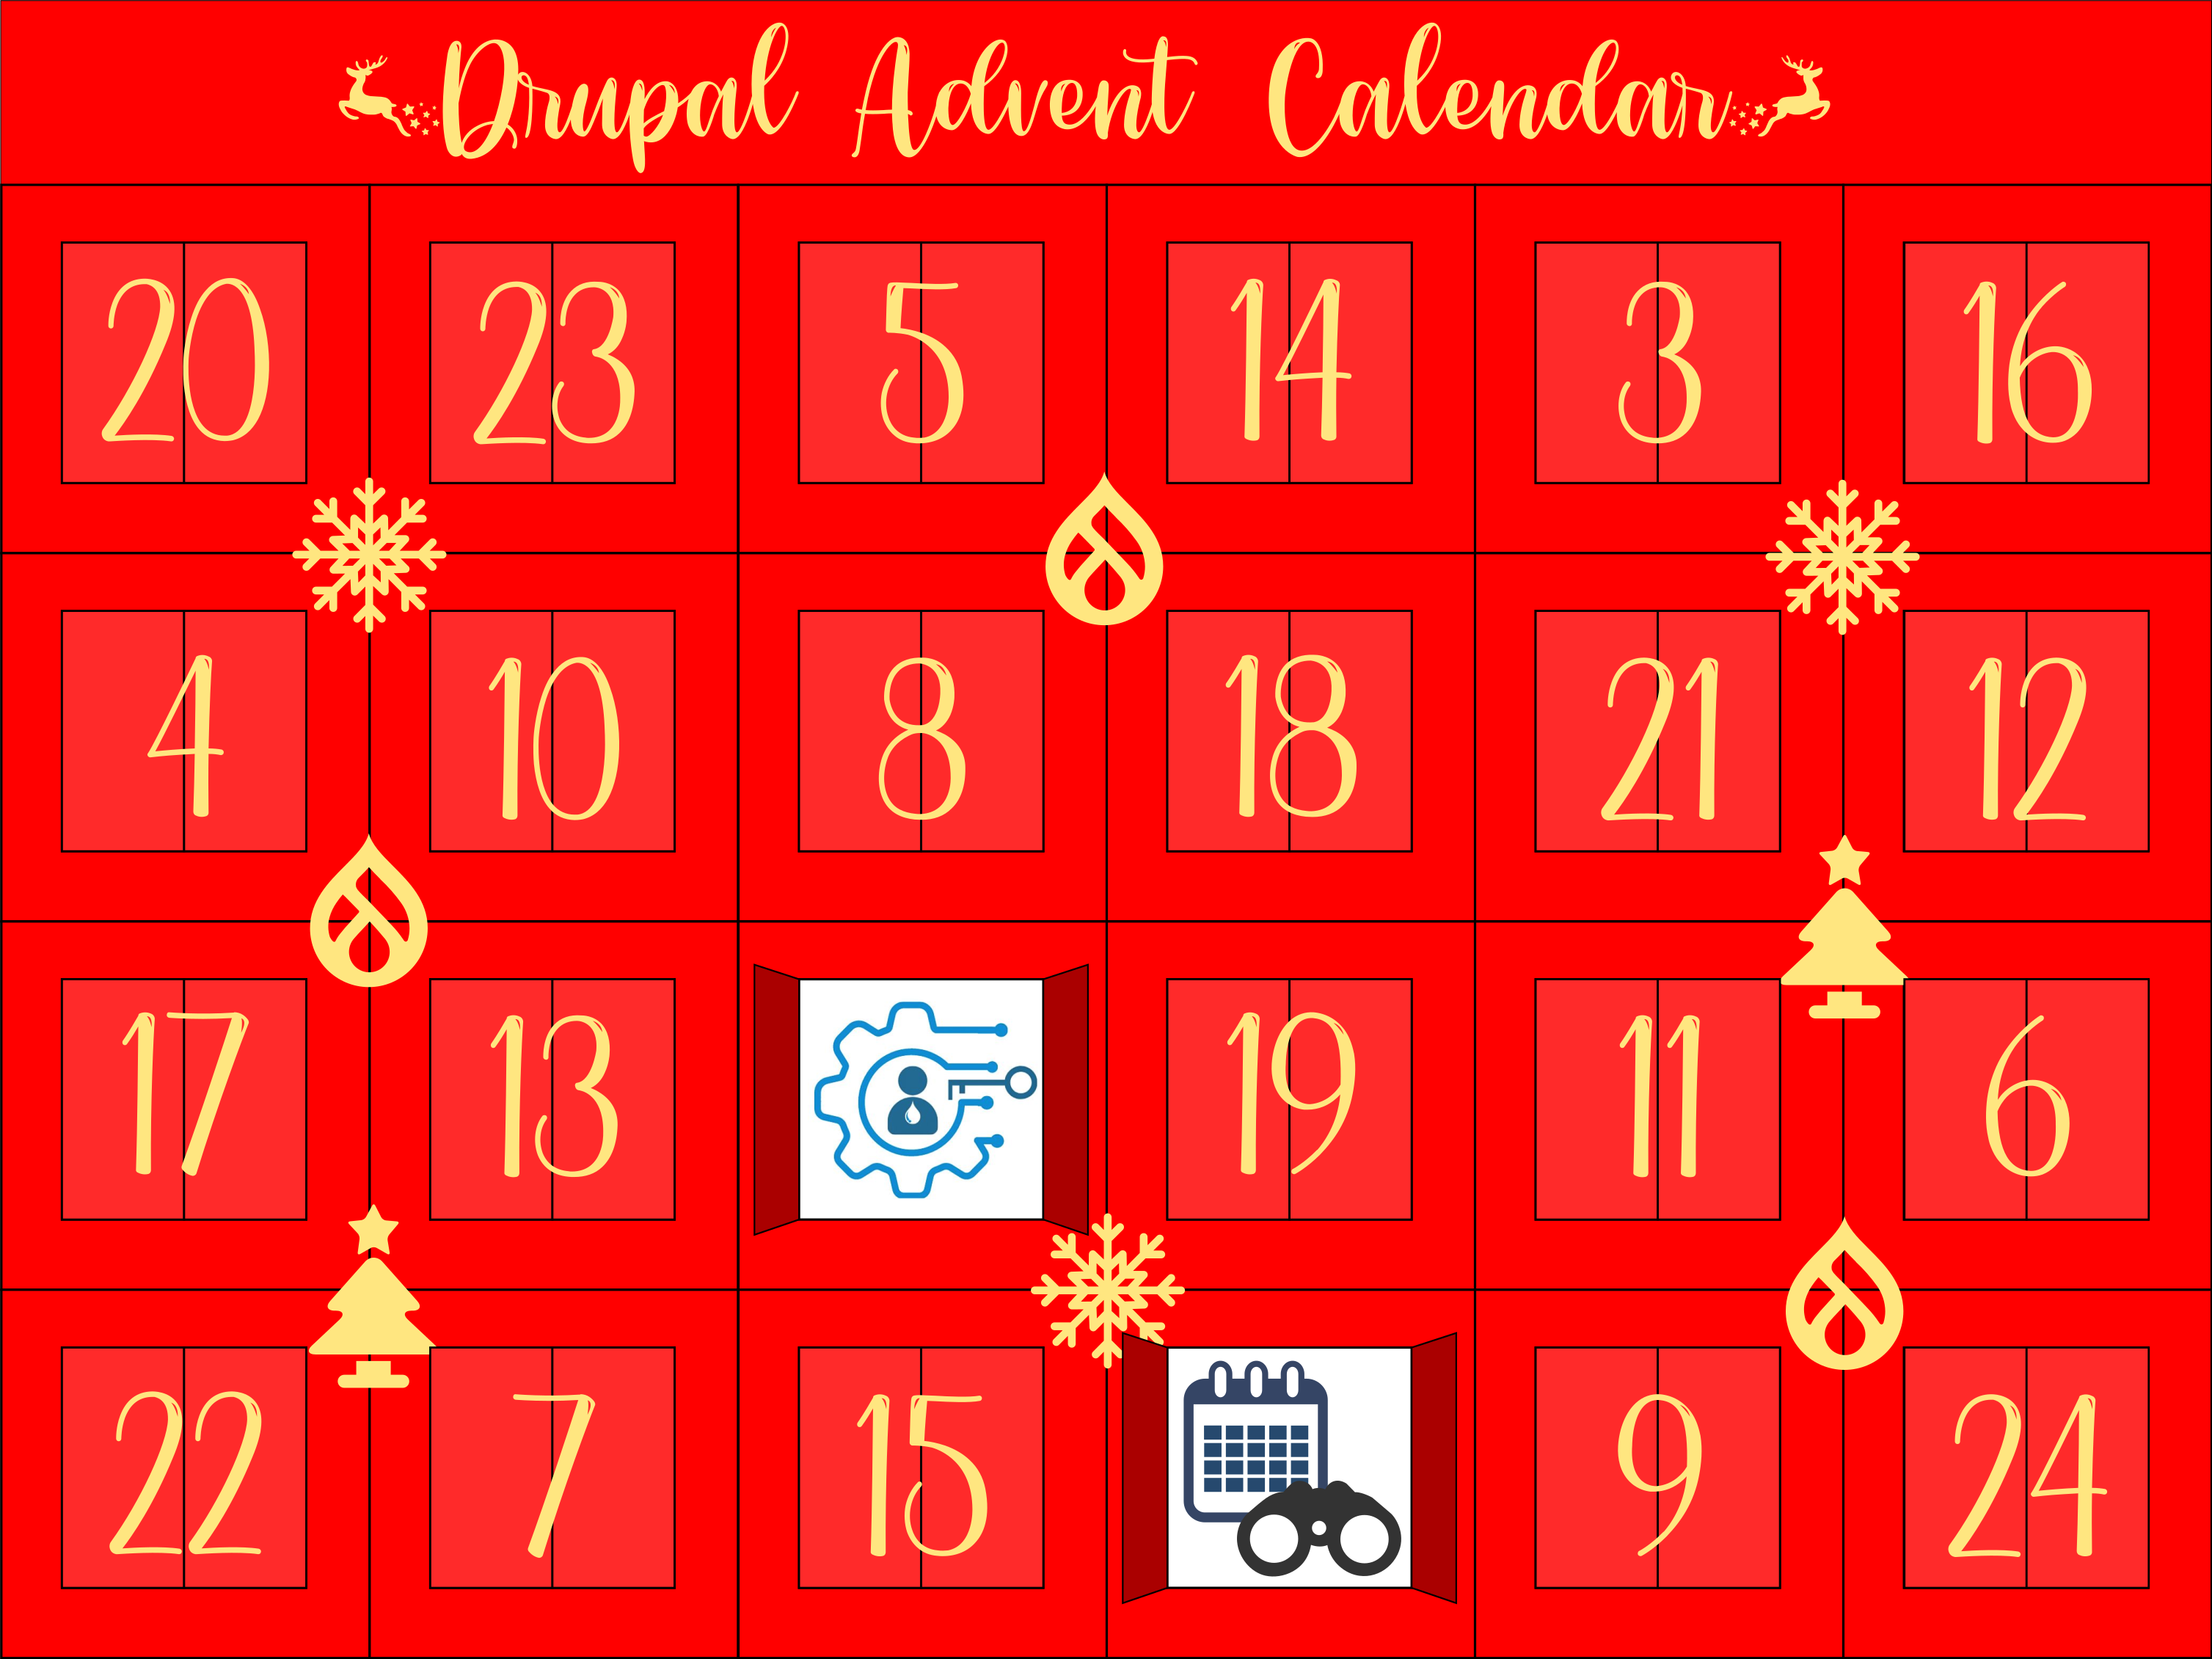 Advent calendar with doors 1 and 2 open, and Calender View icon behind door 2.